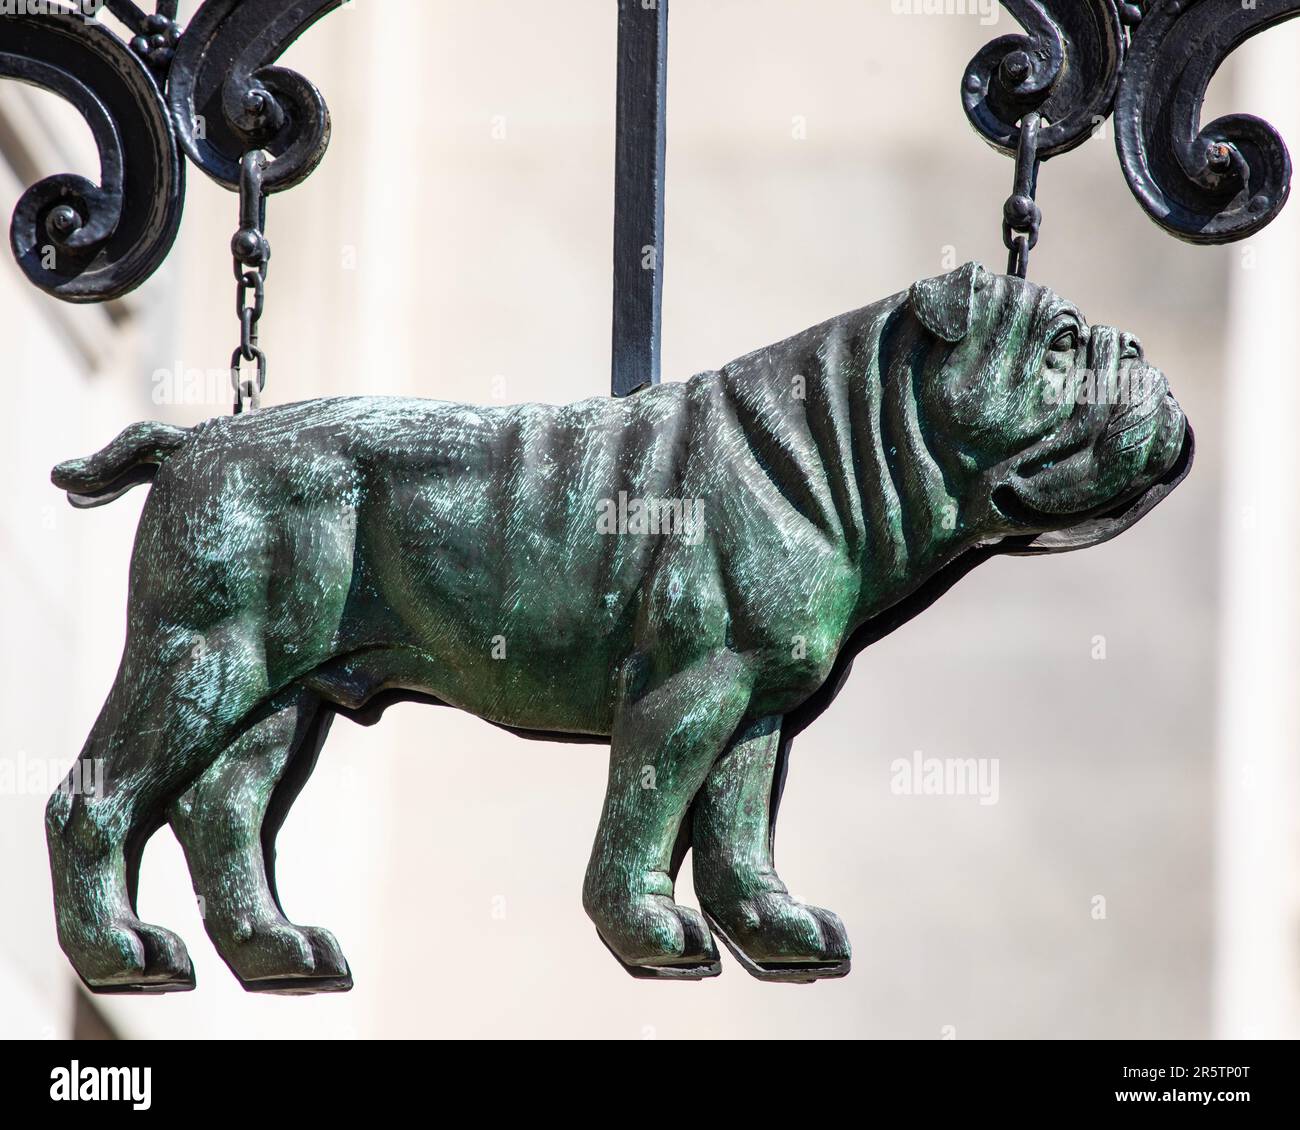 London, UK - April 20th 2023: Close-up of a Bulldog hanging sign on the exterior of Two Temple Place in London, UK. Stock Photo